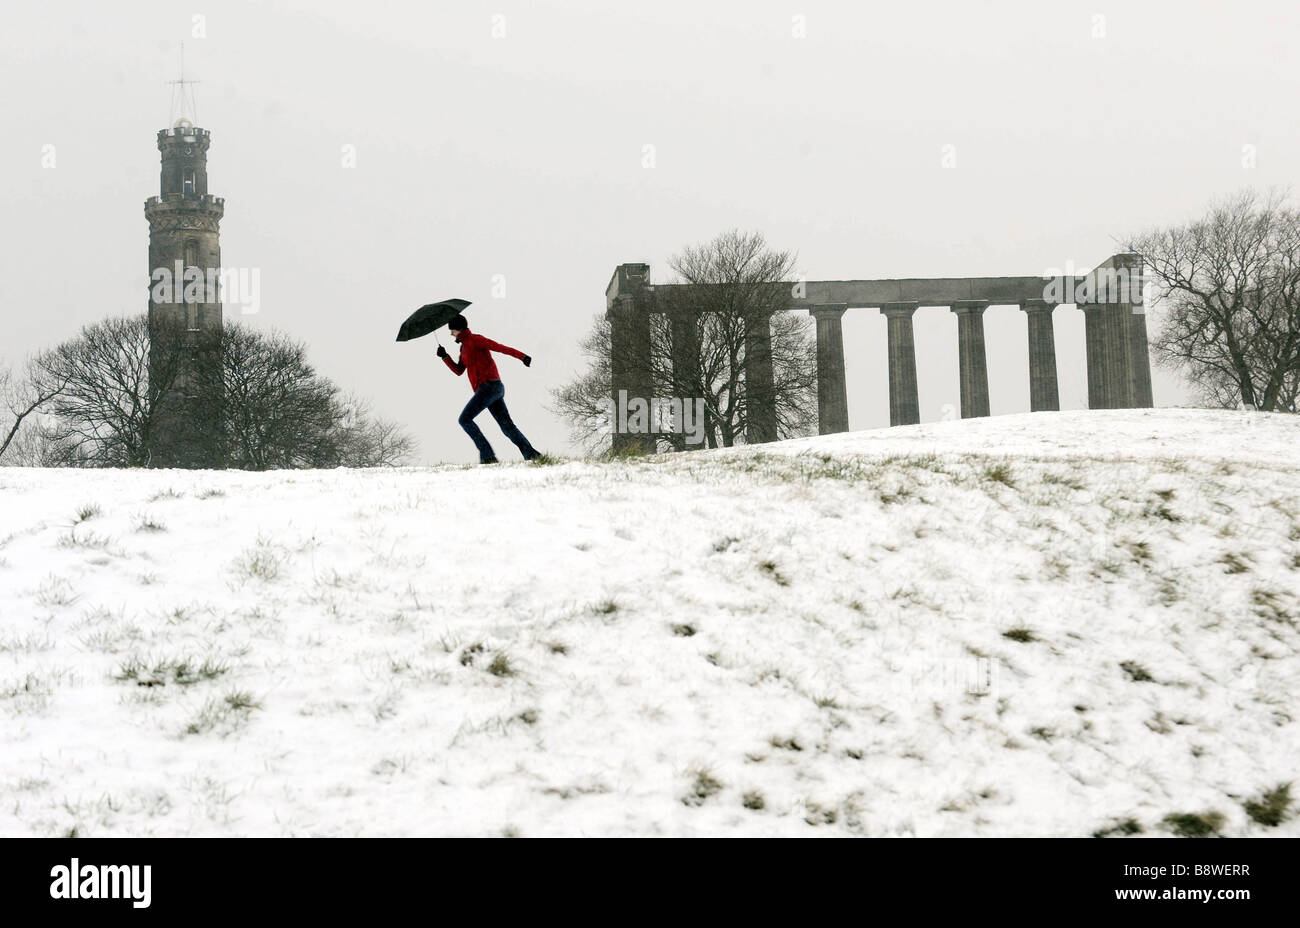 Snow covers Calton Hill in Edinburgh during some of the worst snow storms to hit Britain for decades, February 2009 Stock Photo